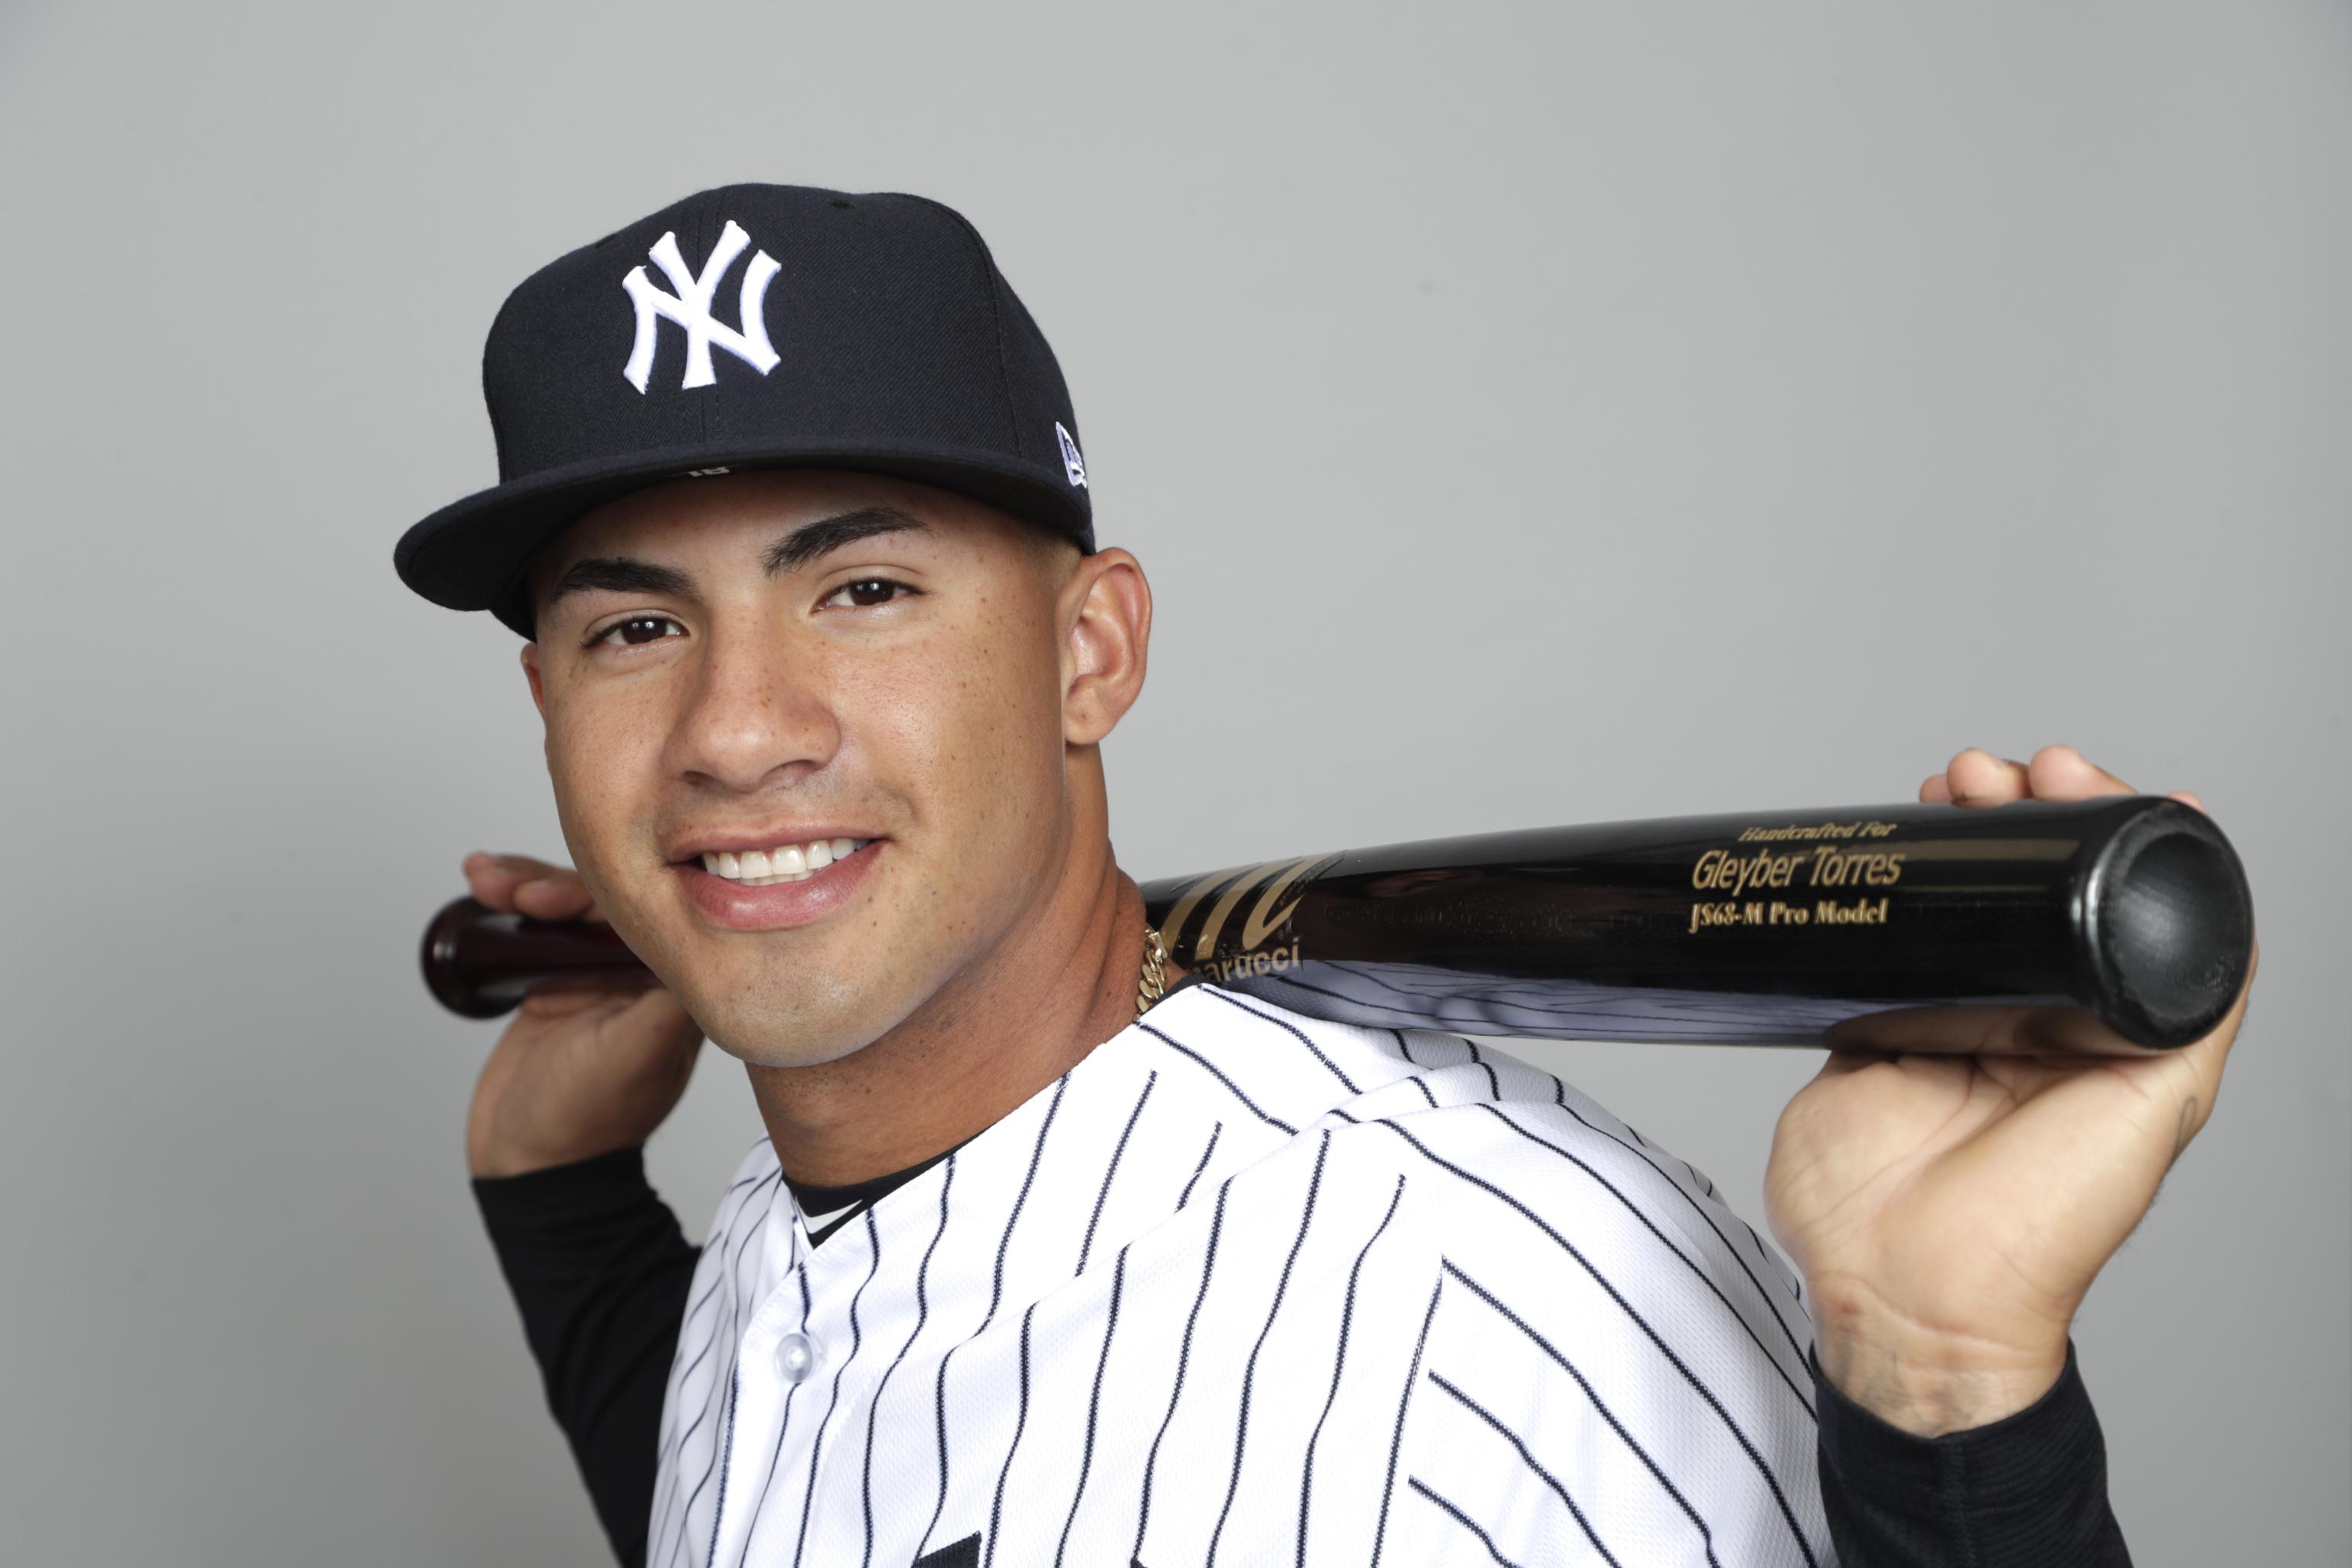 NY Yankees spring training: Gleyber Torres feeling healthy after debut